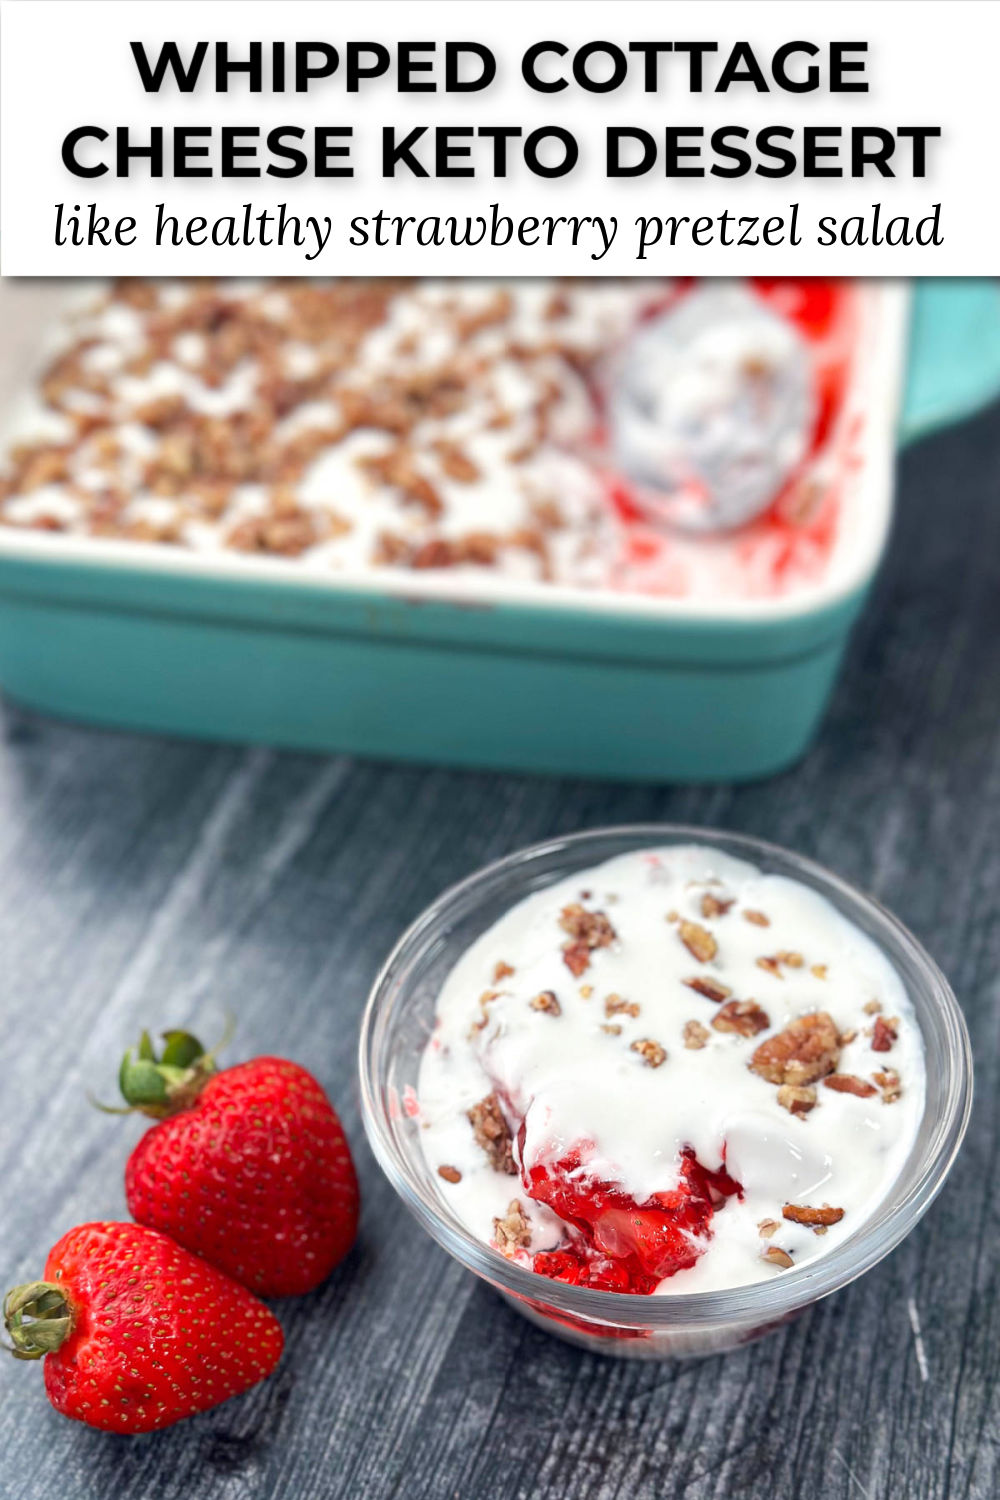 keto strawberry jello and whipped cottage cheese dessert and text